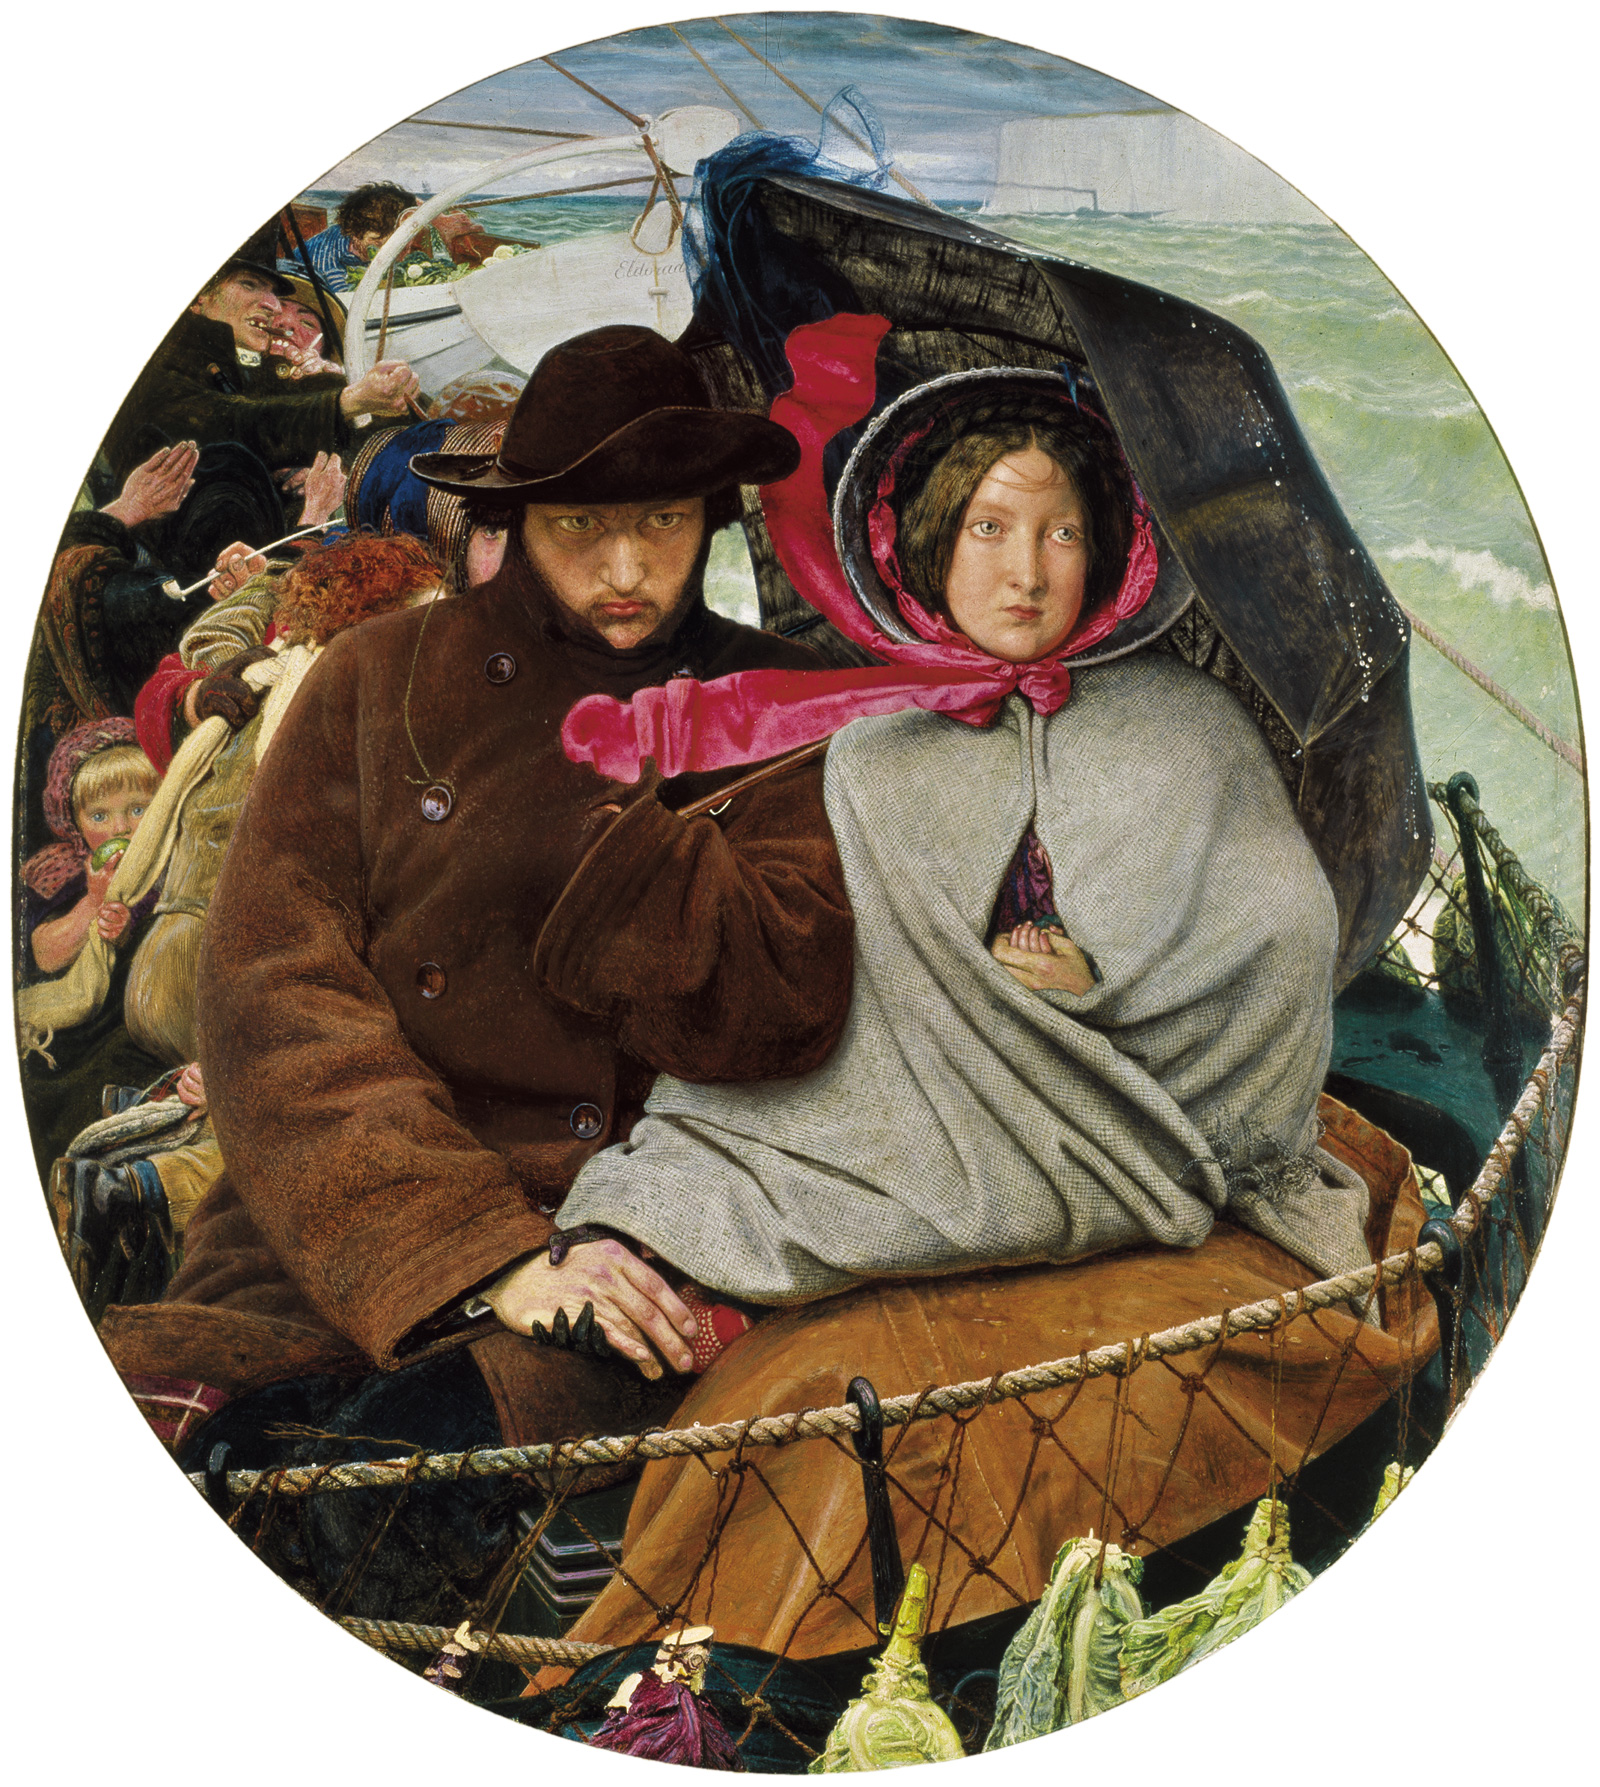 Ford Maddox Brown: The Last of England, 1852–1855